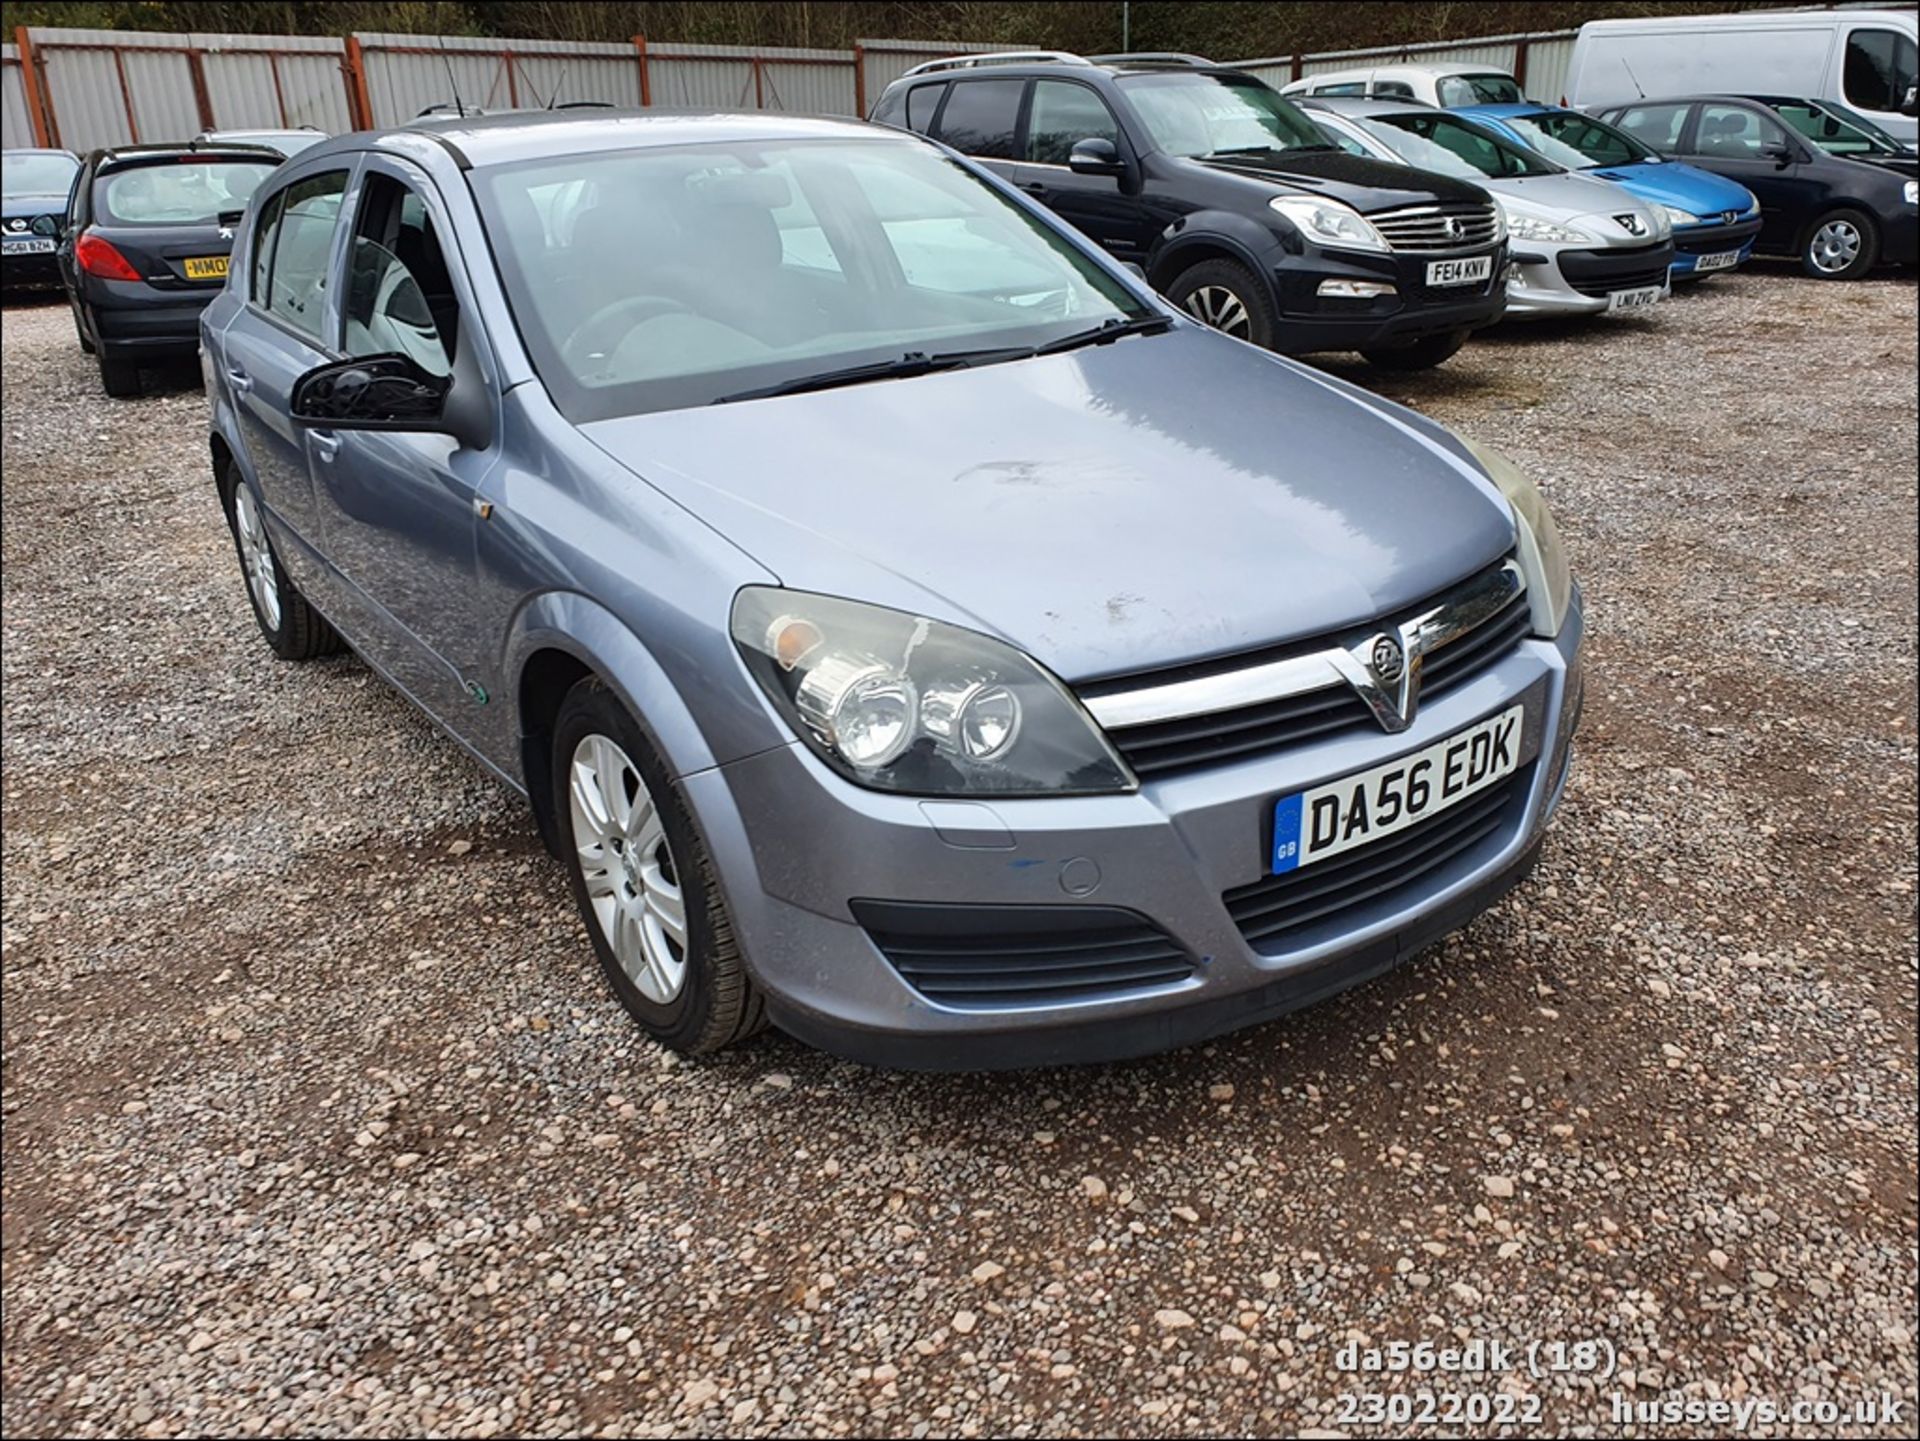 06/56 VAUXHALL ASTRA ACTIVE - 1598cc 5dr Hatchback (Silver) - Image 17 of 42